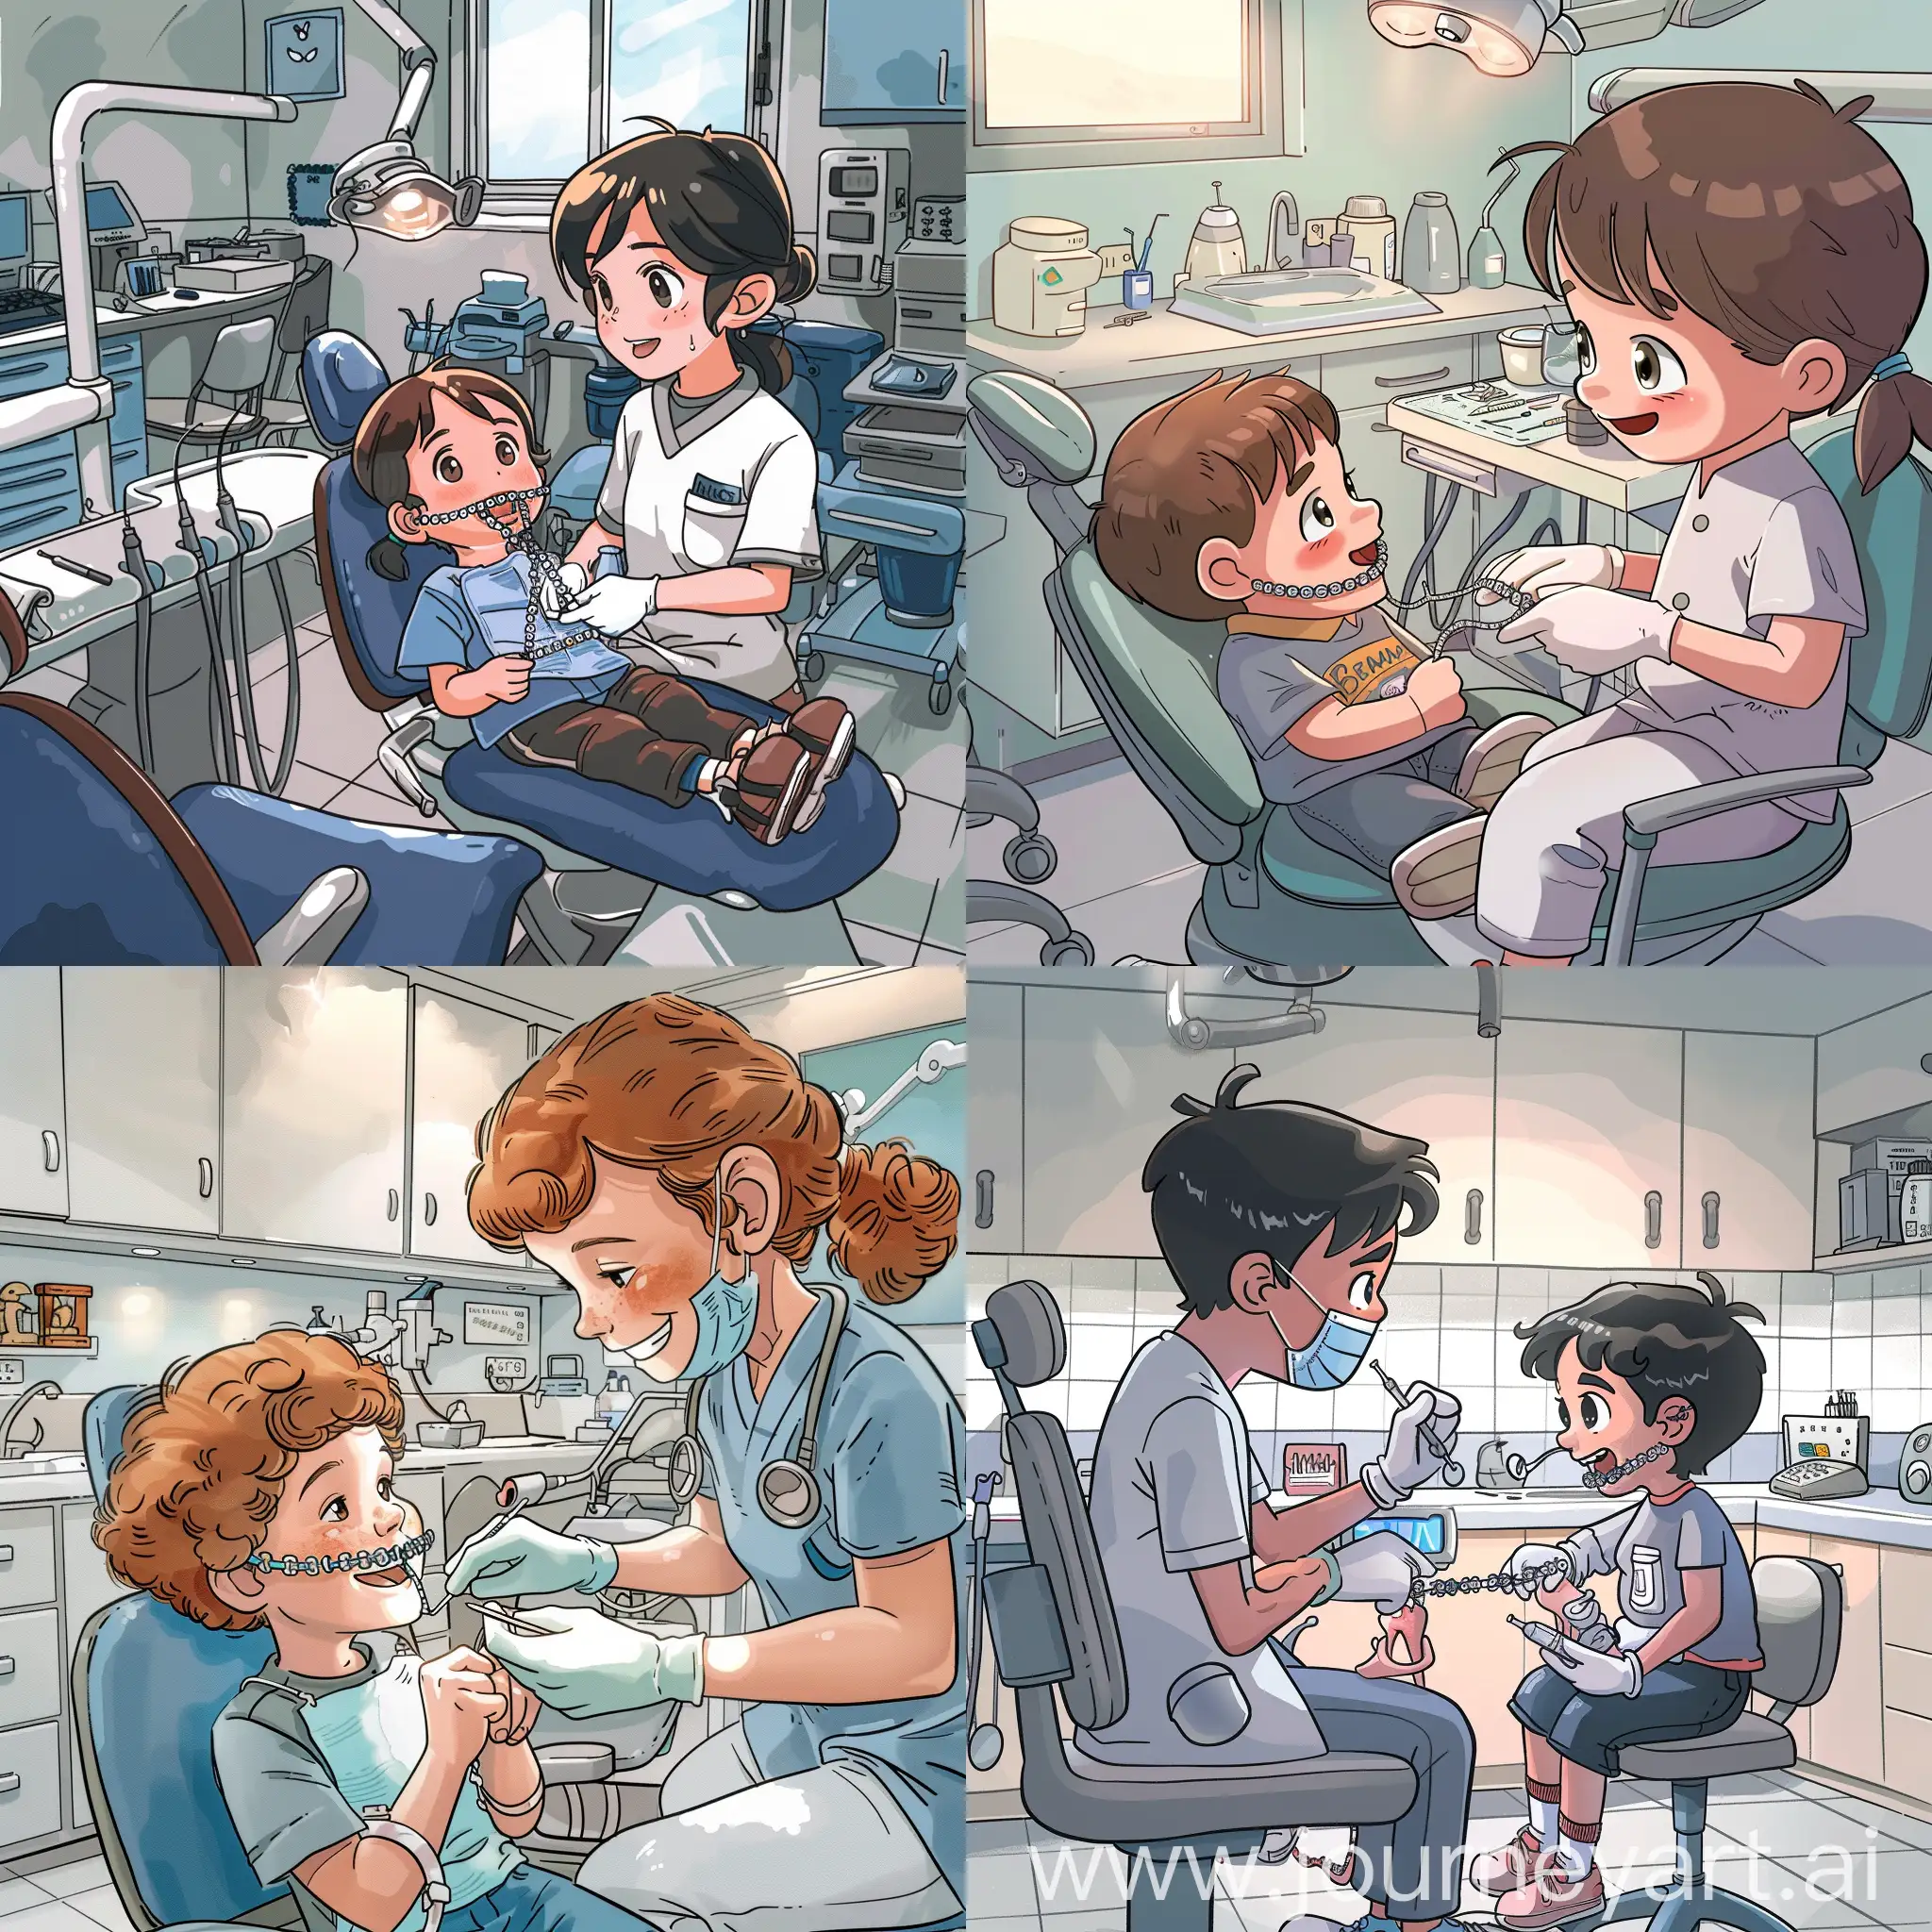 Child-Getting-Braces-at-Dentists-Office-with-Cartoon-Style